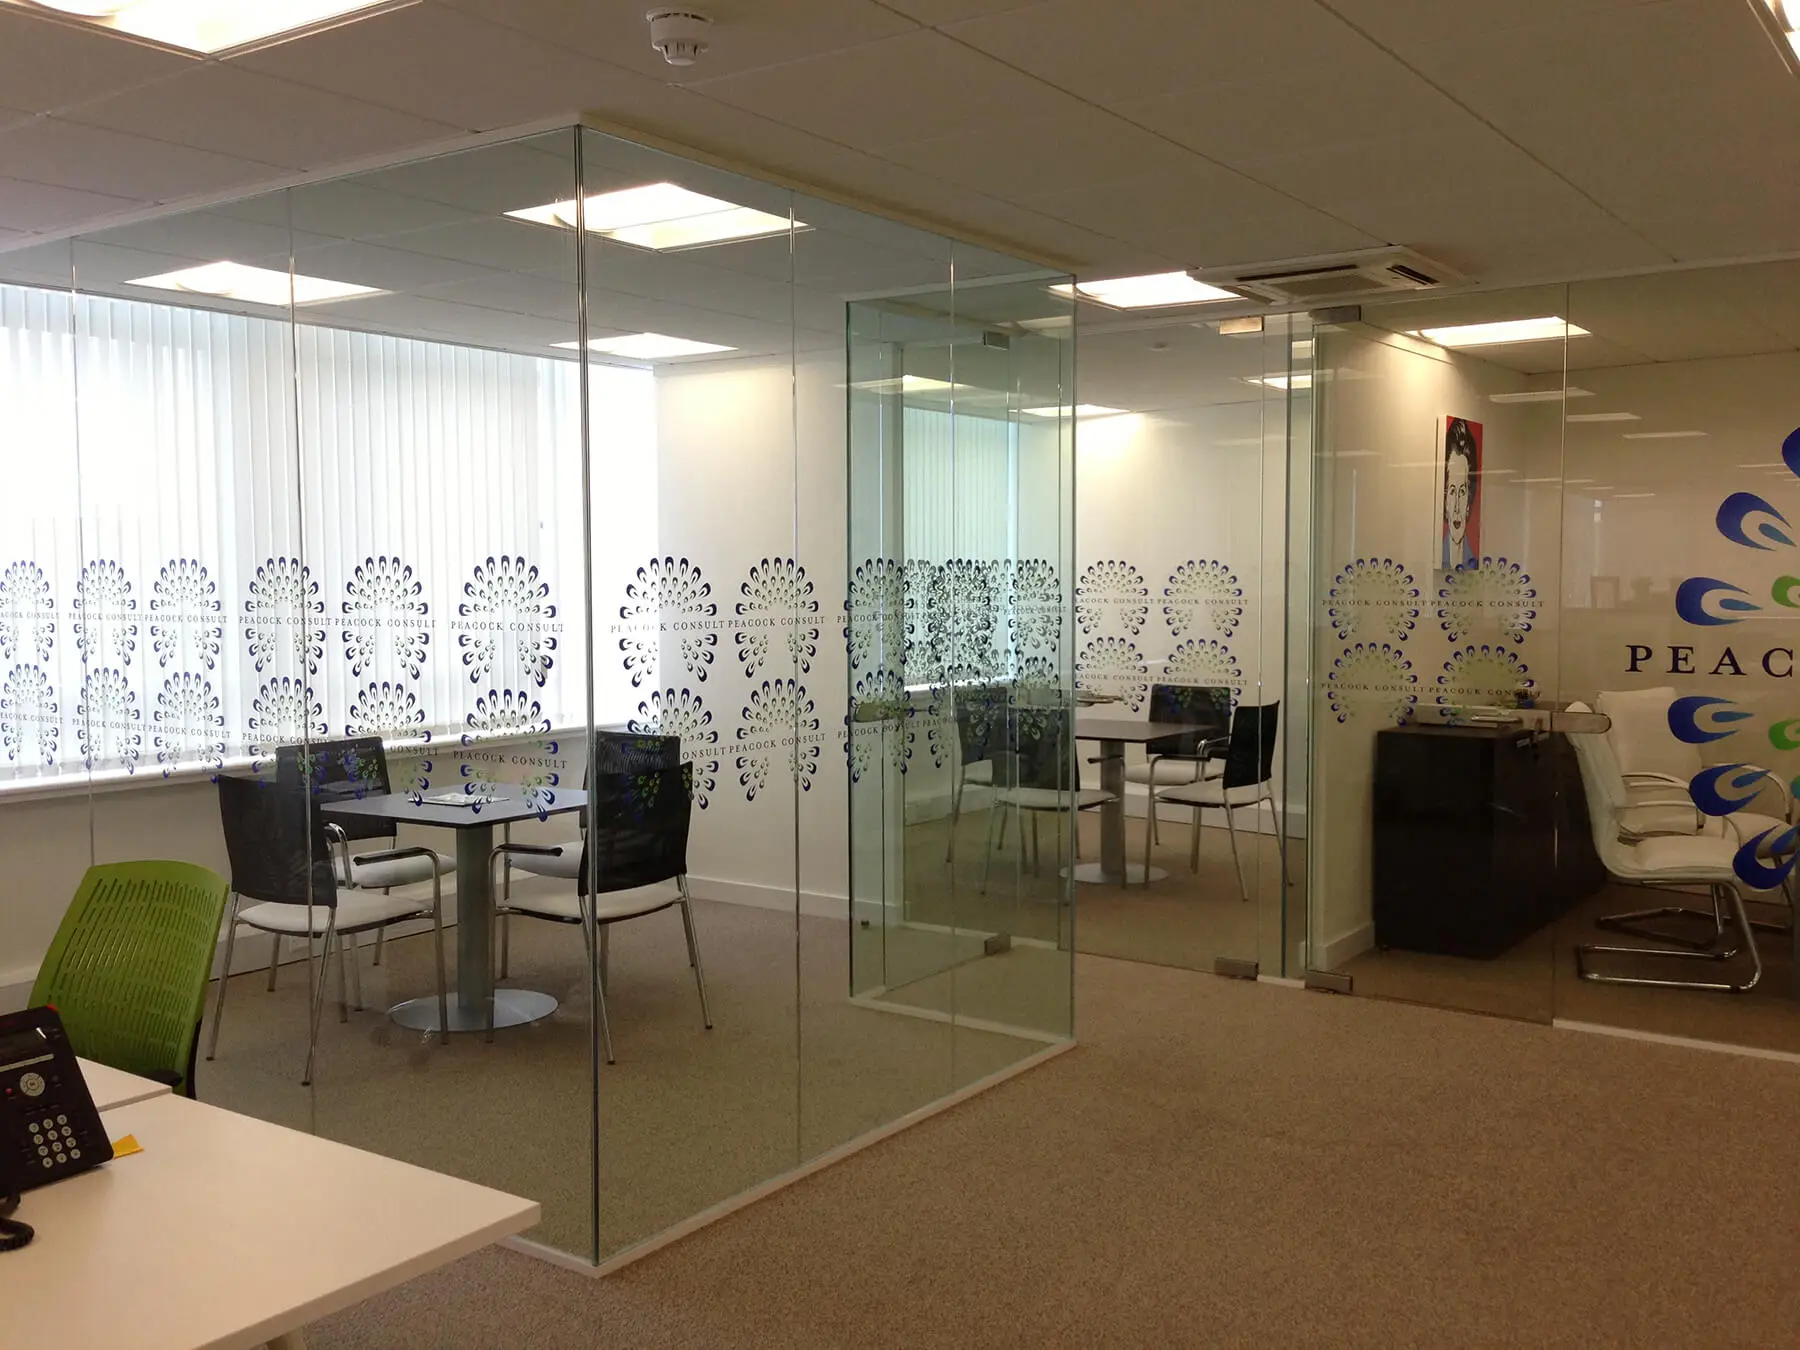 Meeting space divided with glass partitions